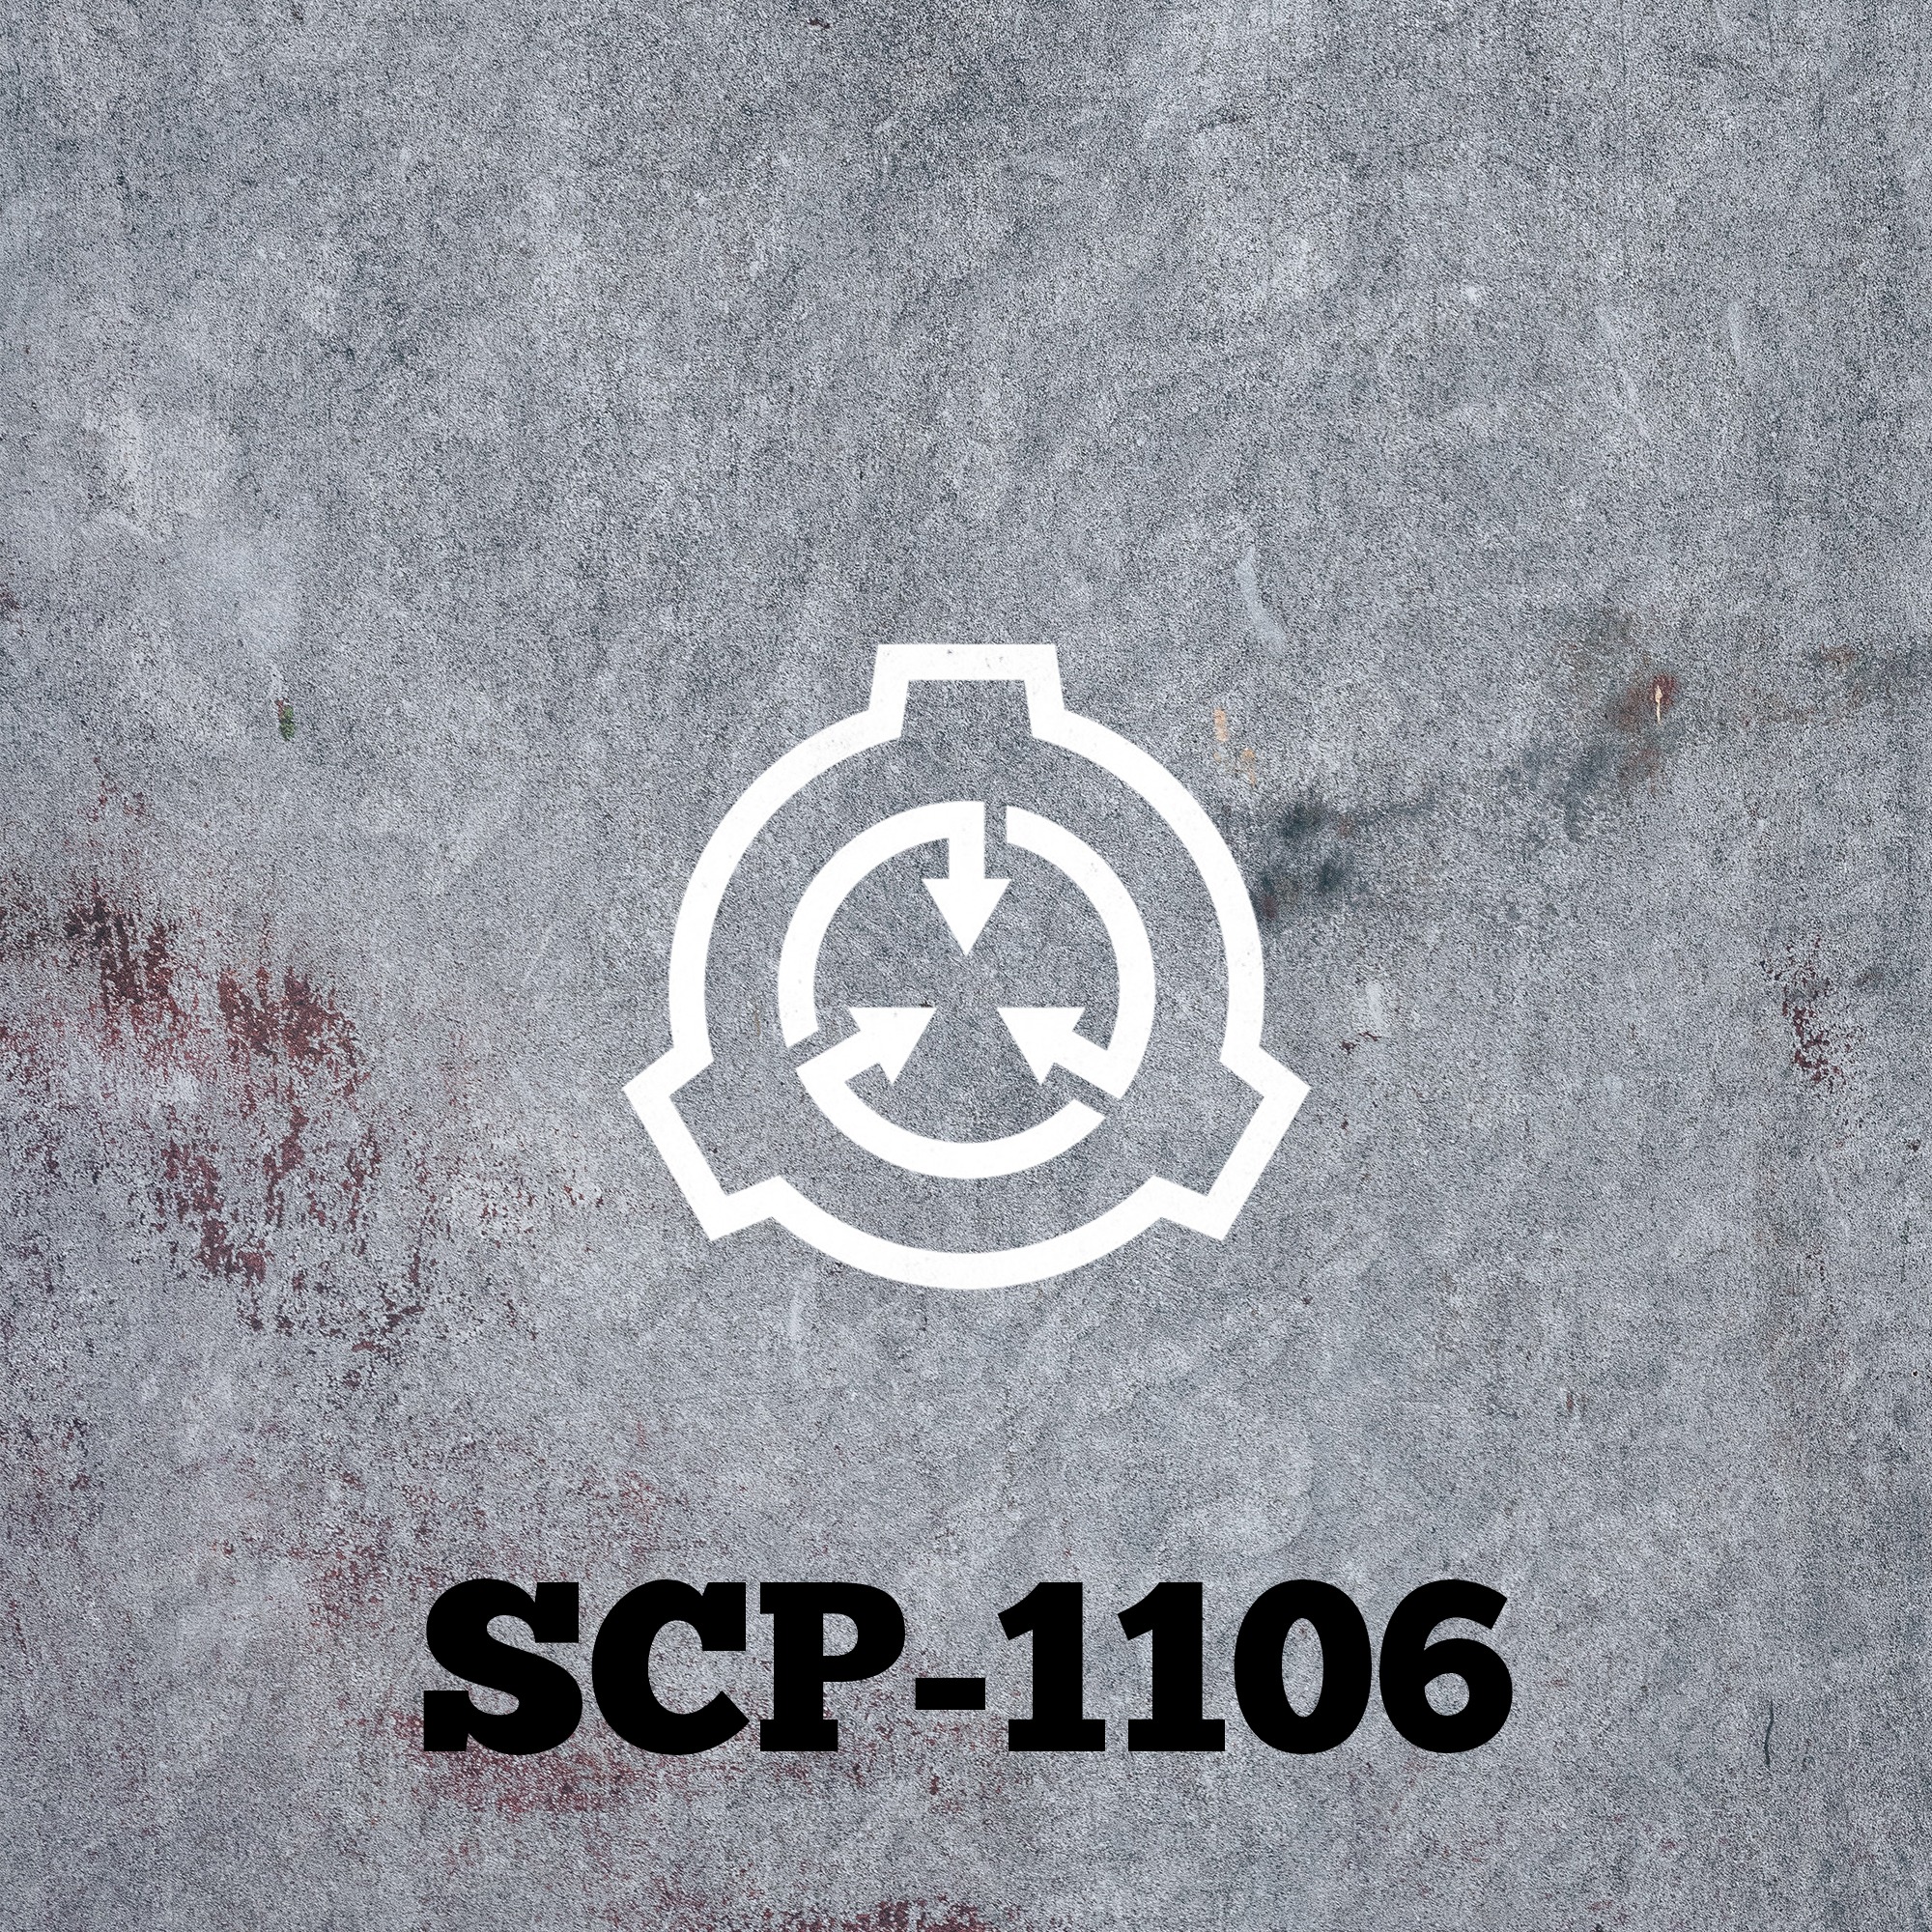 SCP-1106: ”Grow Your Own Child” Kit